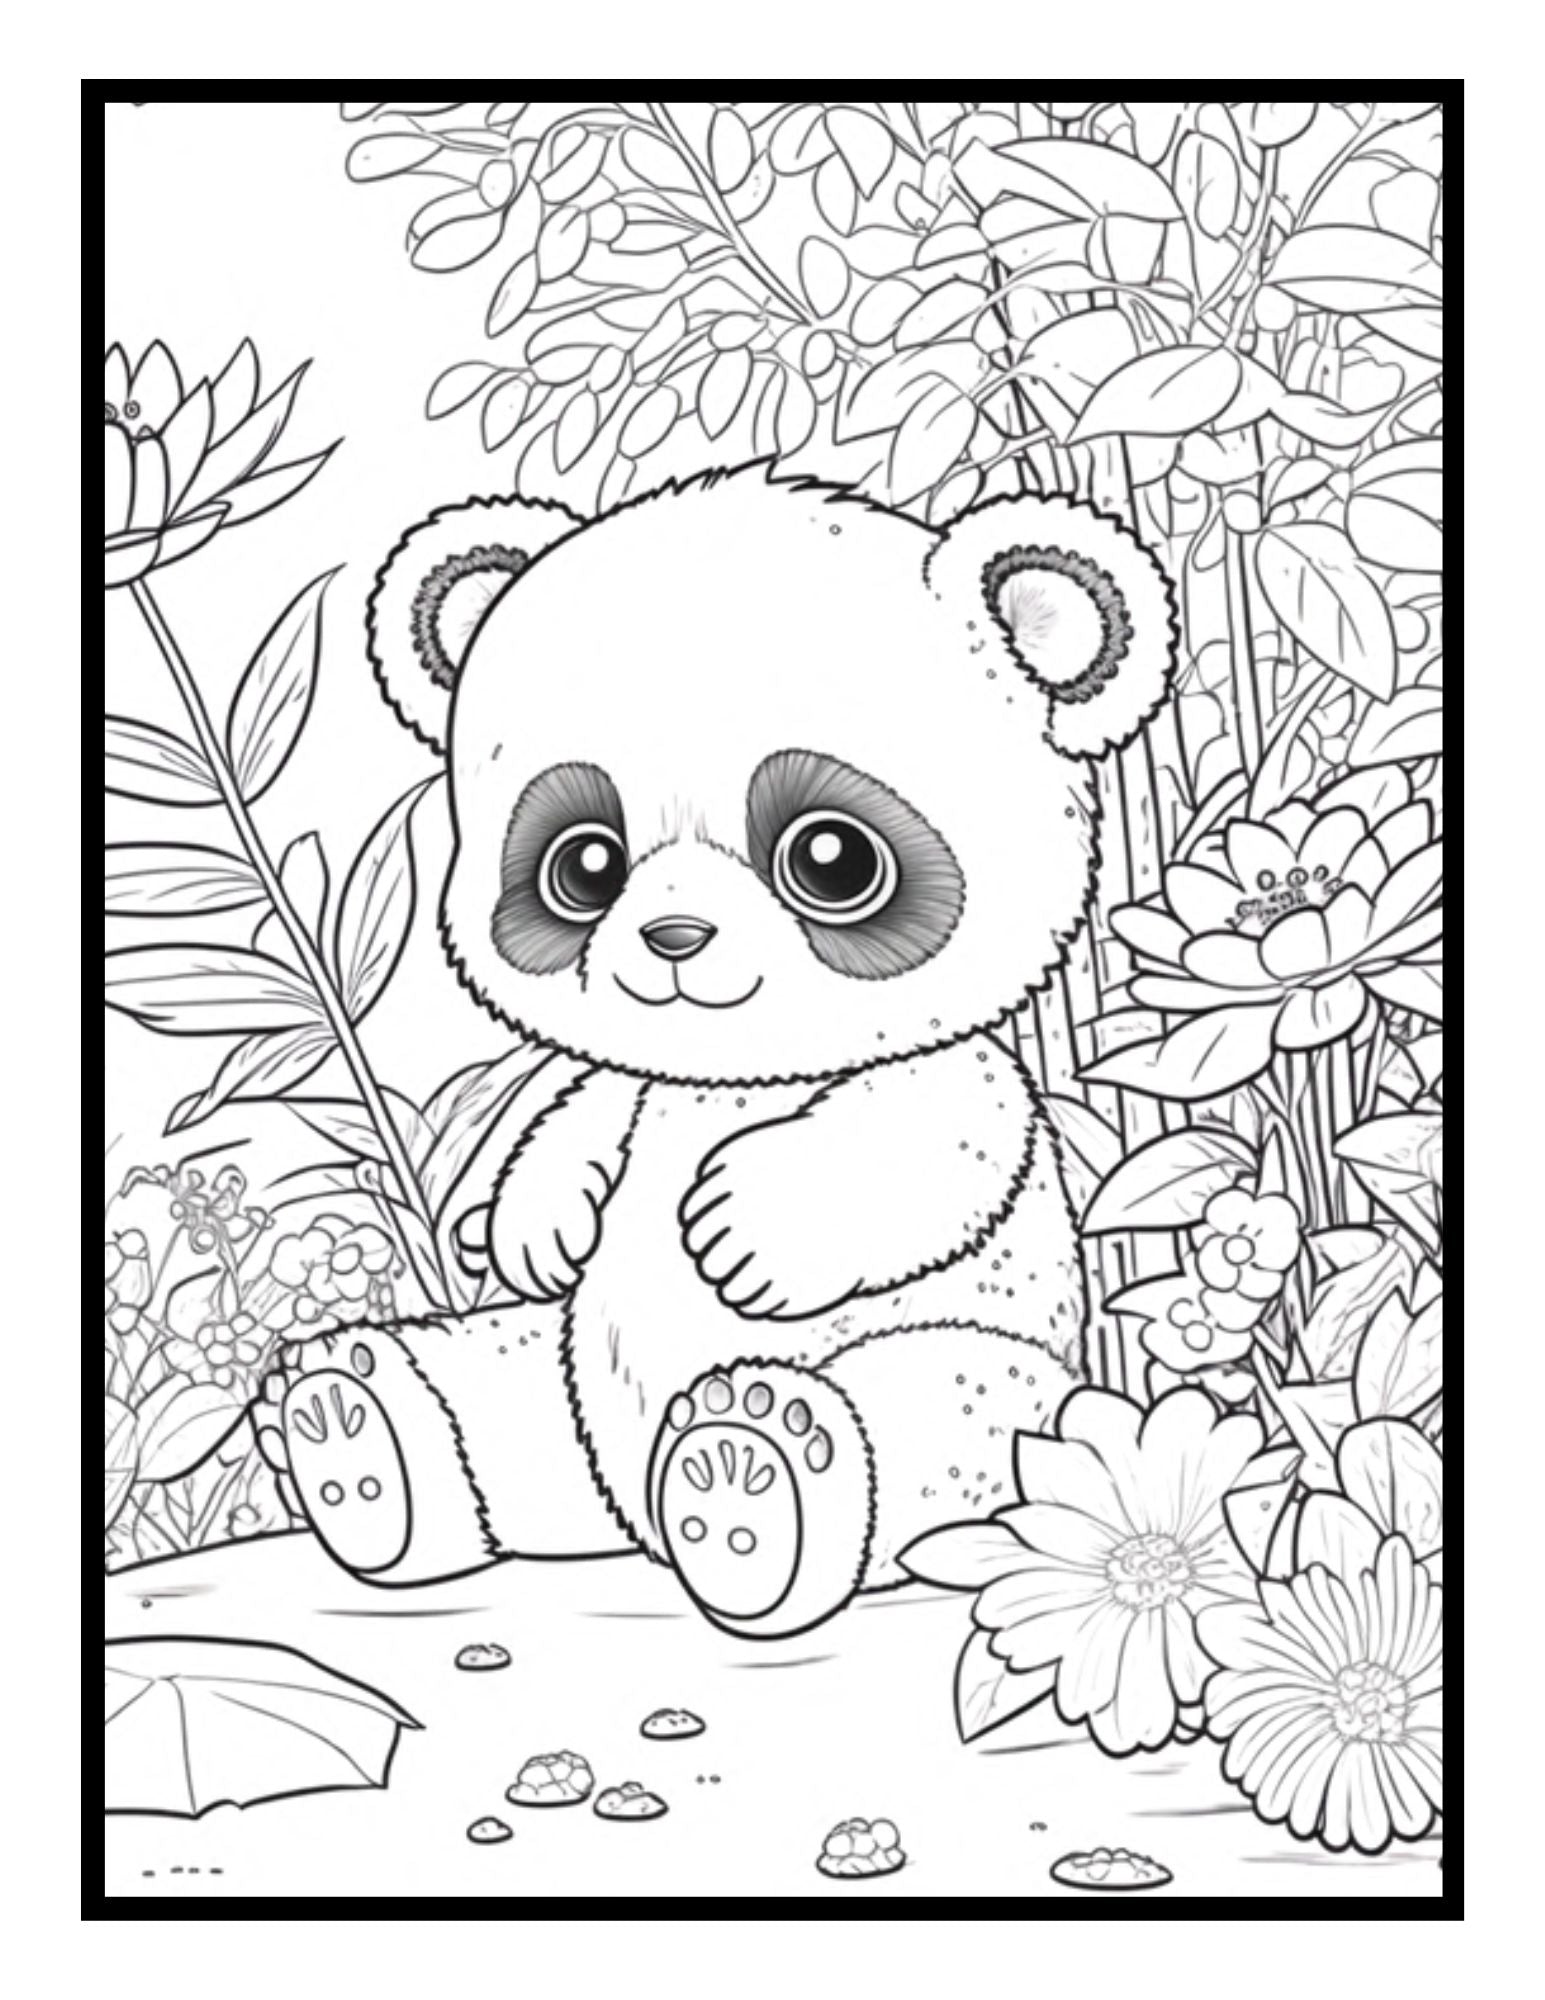 Panda Coloring Book For Girls Ages 8-12: Find Relaxation And